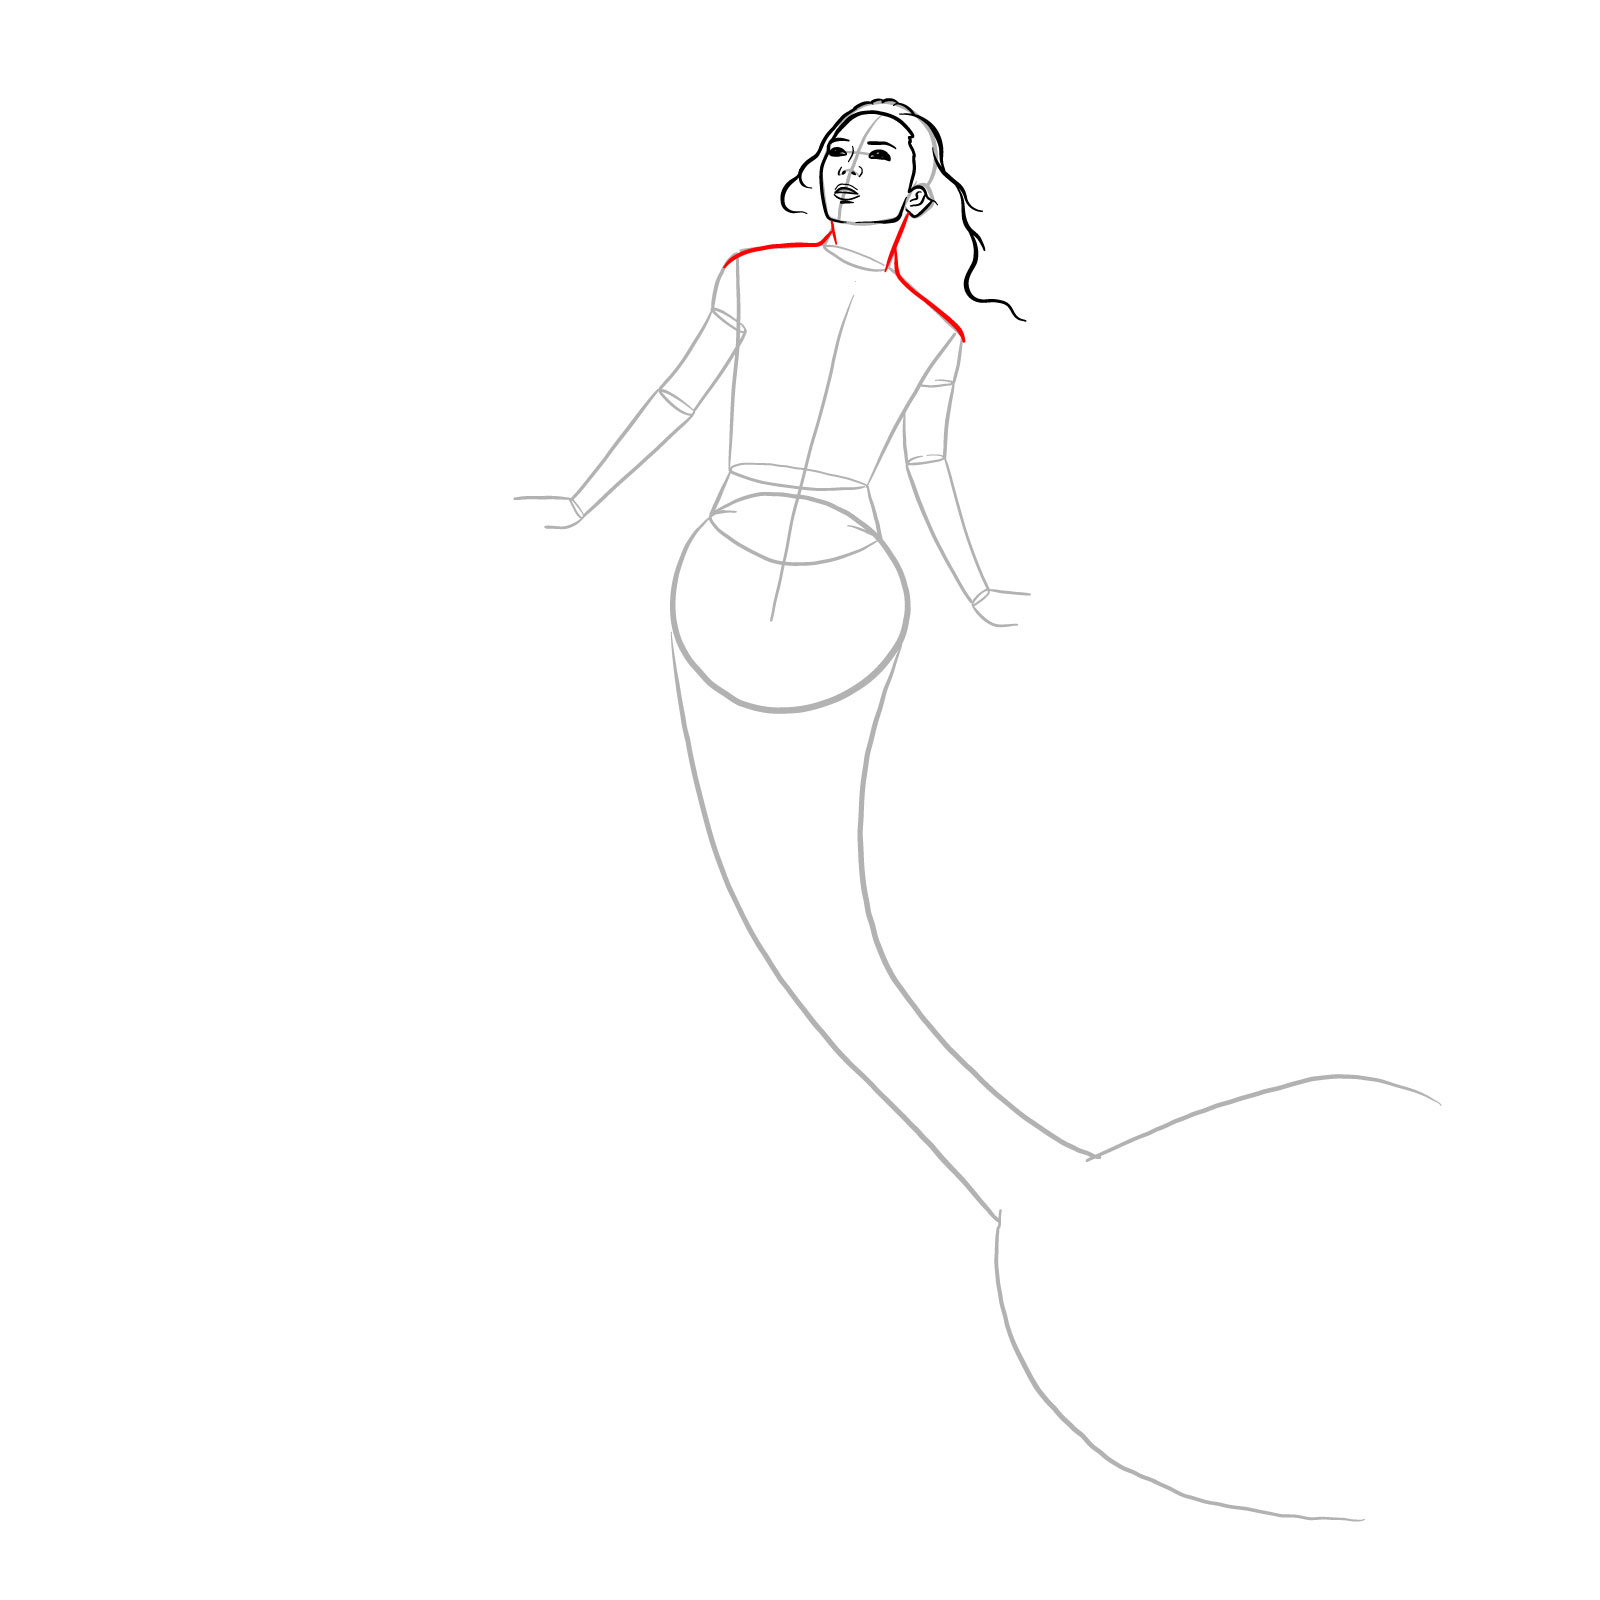 How to draw a Mermaid - step 09